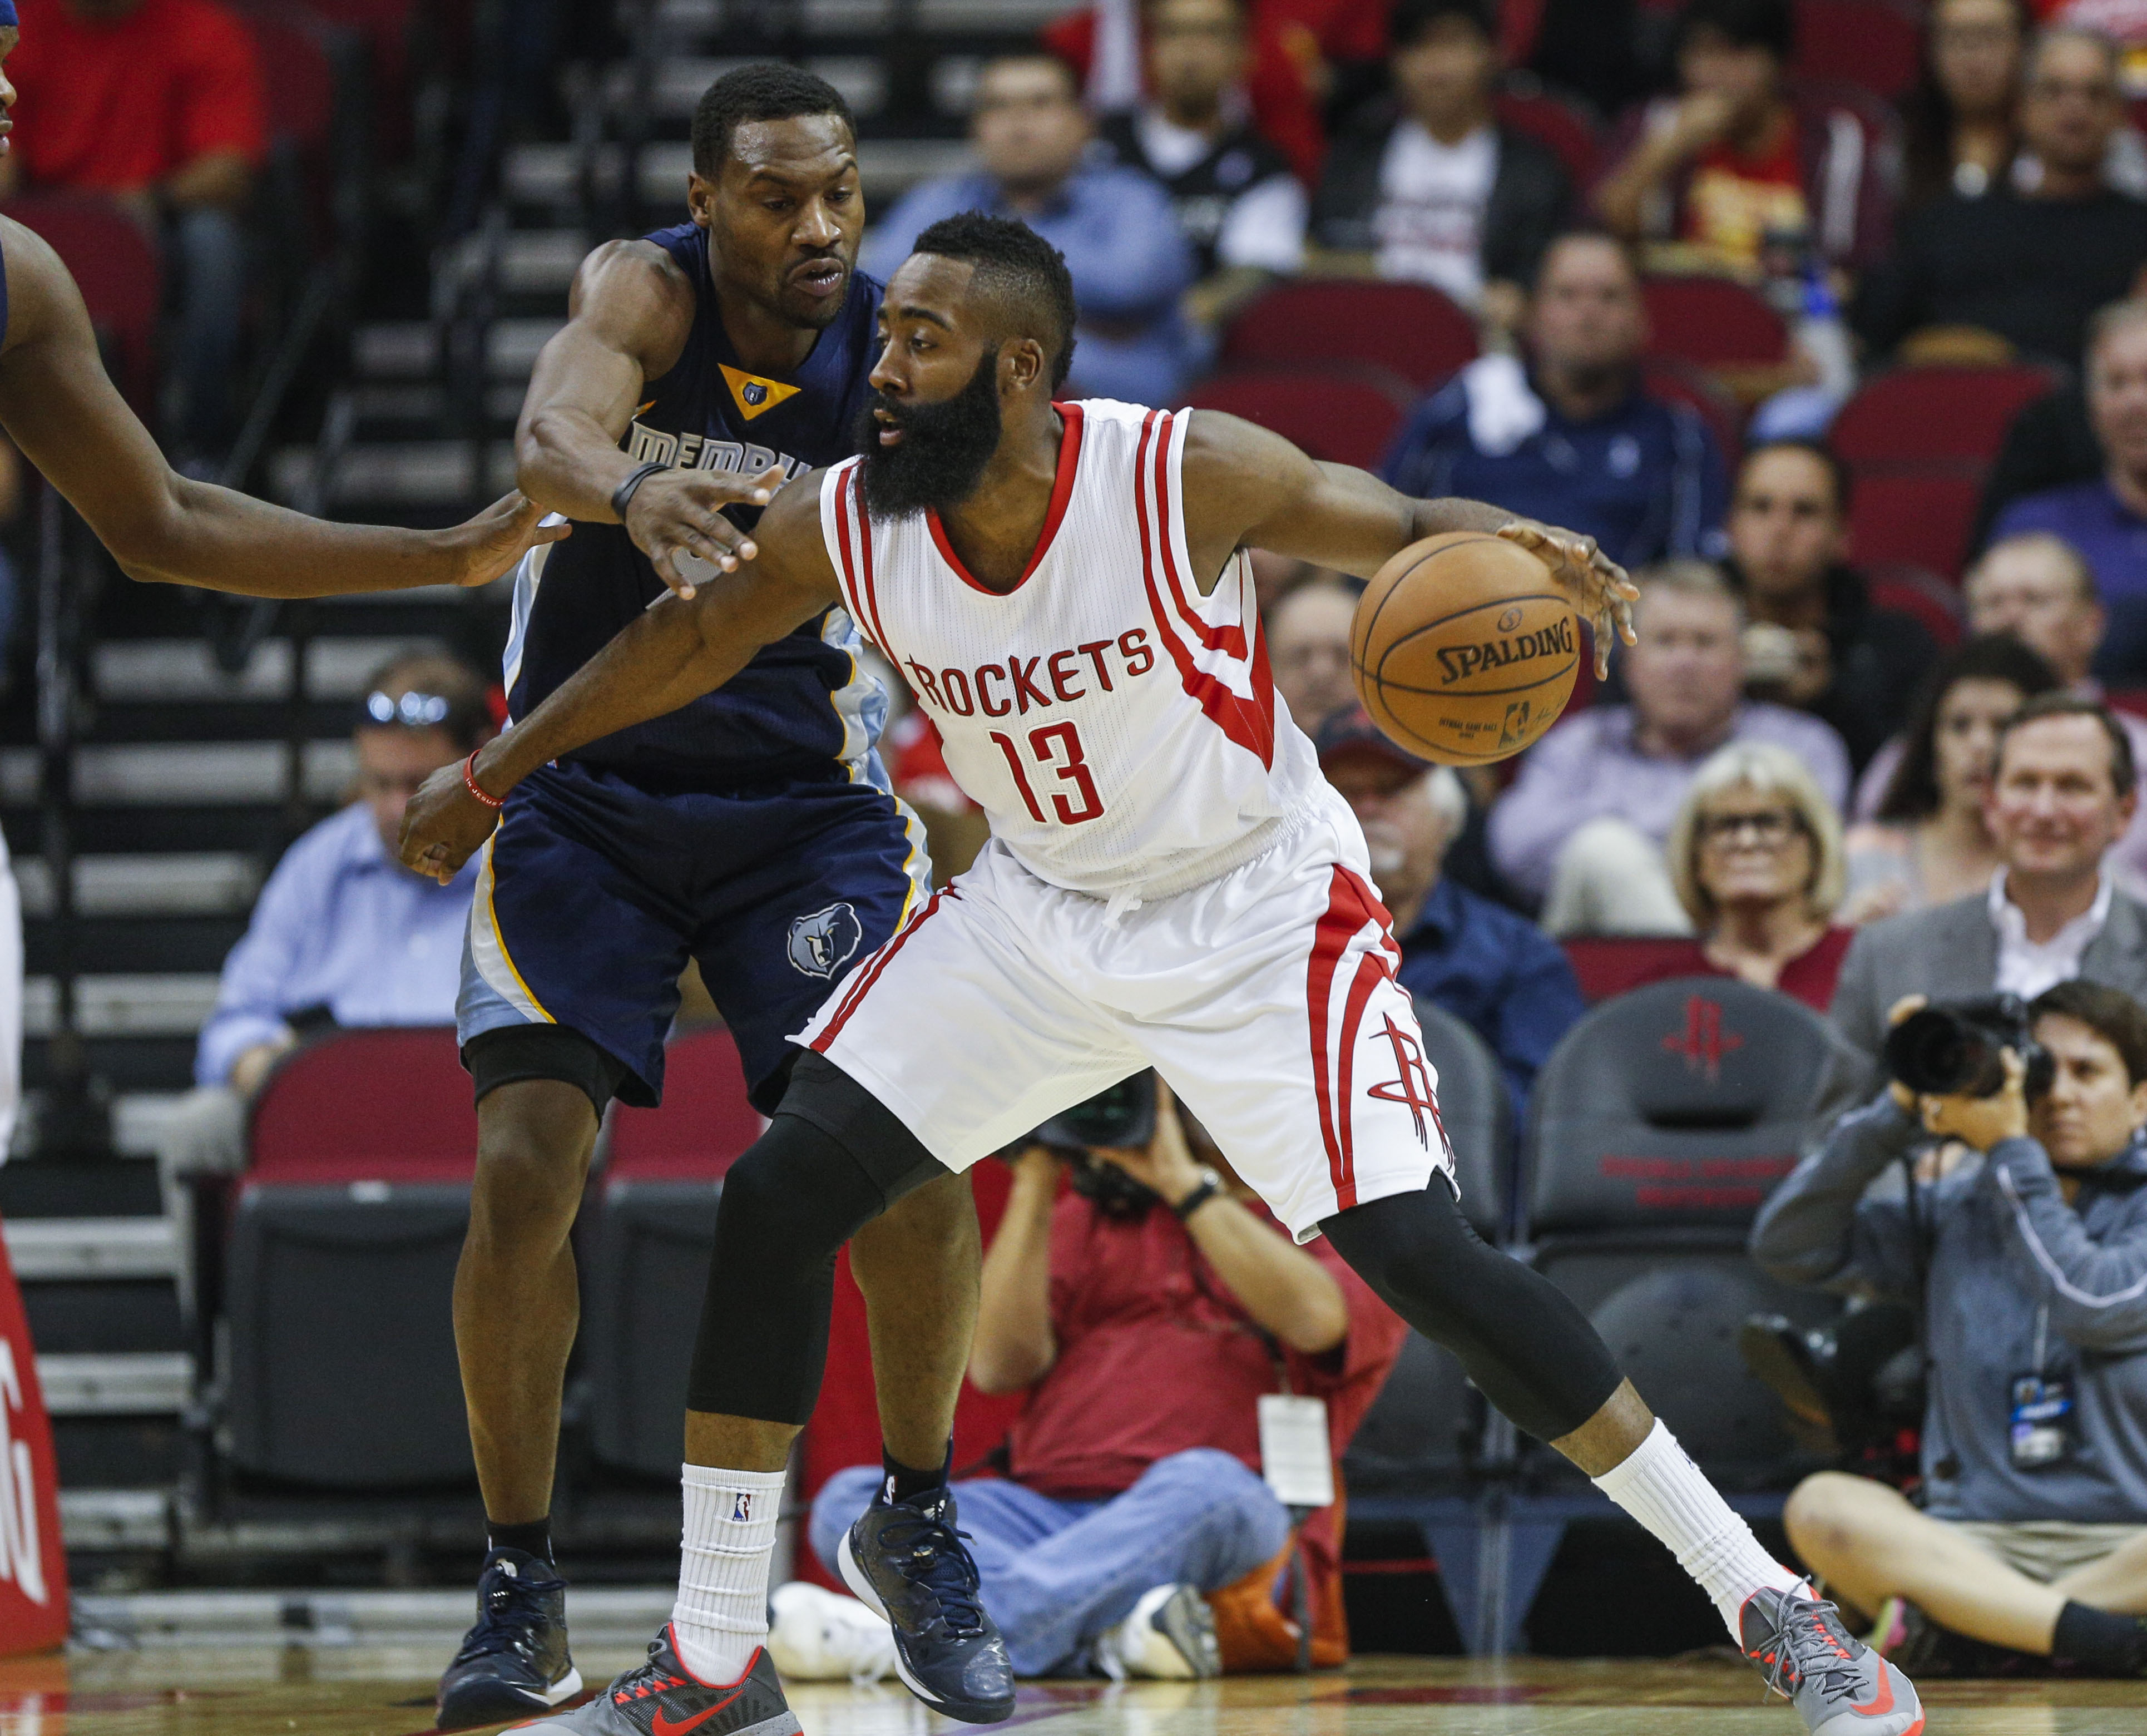 Dec 3, 2014; Houston, TX, USA; Houston Rockets guard James Harden (13) controls the ball during the first quarter as Memphis Grizzlies guard Tony Allen (9) defends at Toyota Center. (Troy Taormina-USA TODAY Sports)